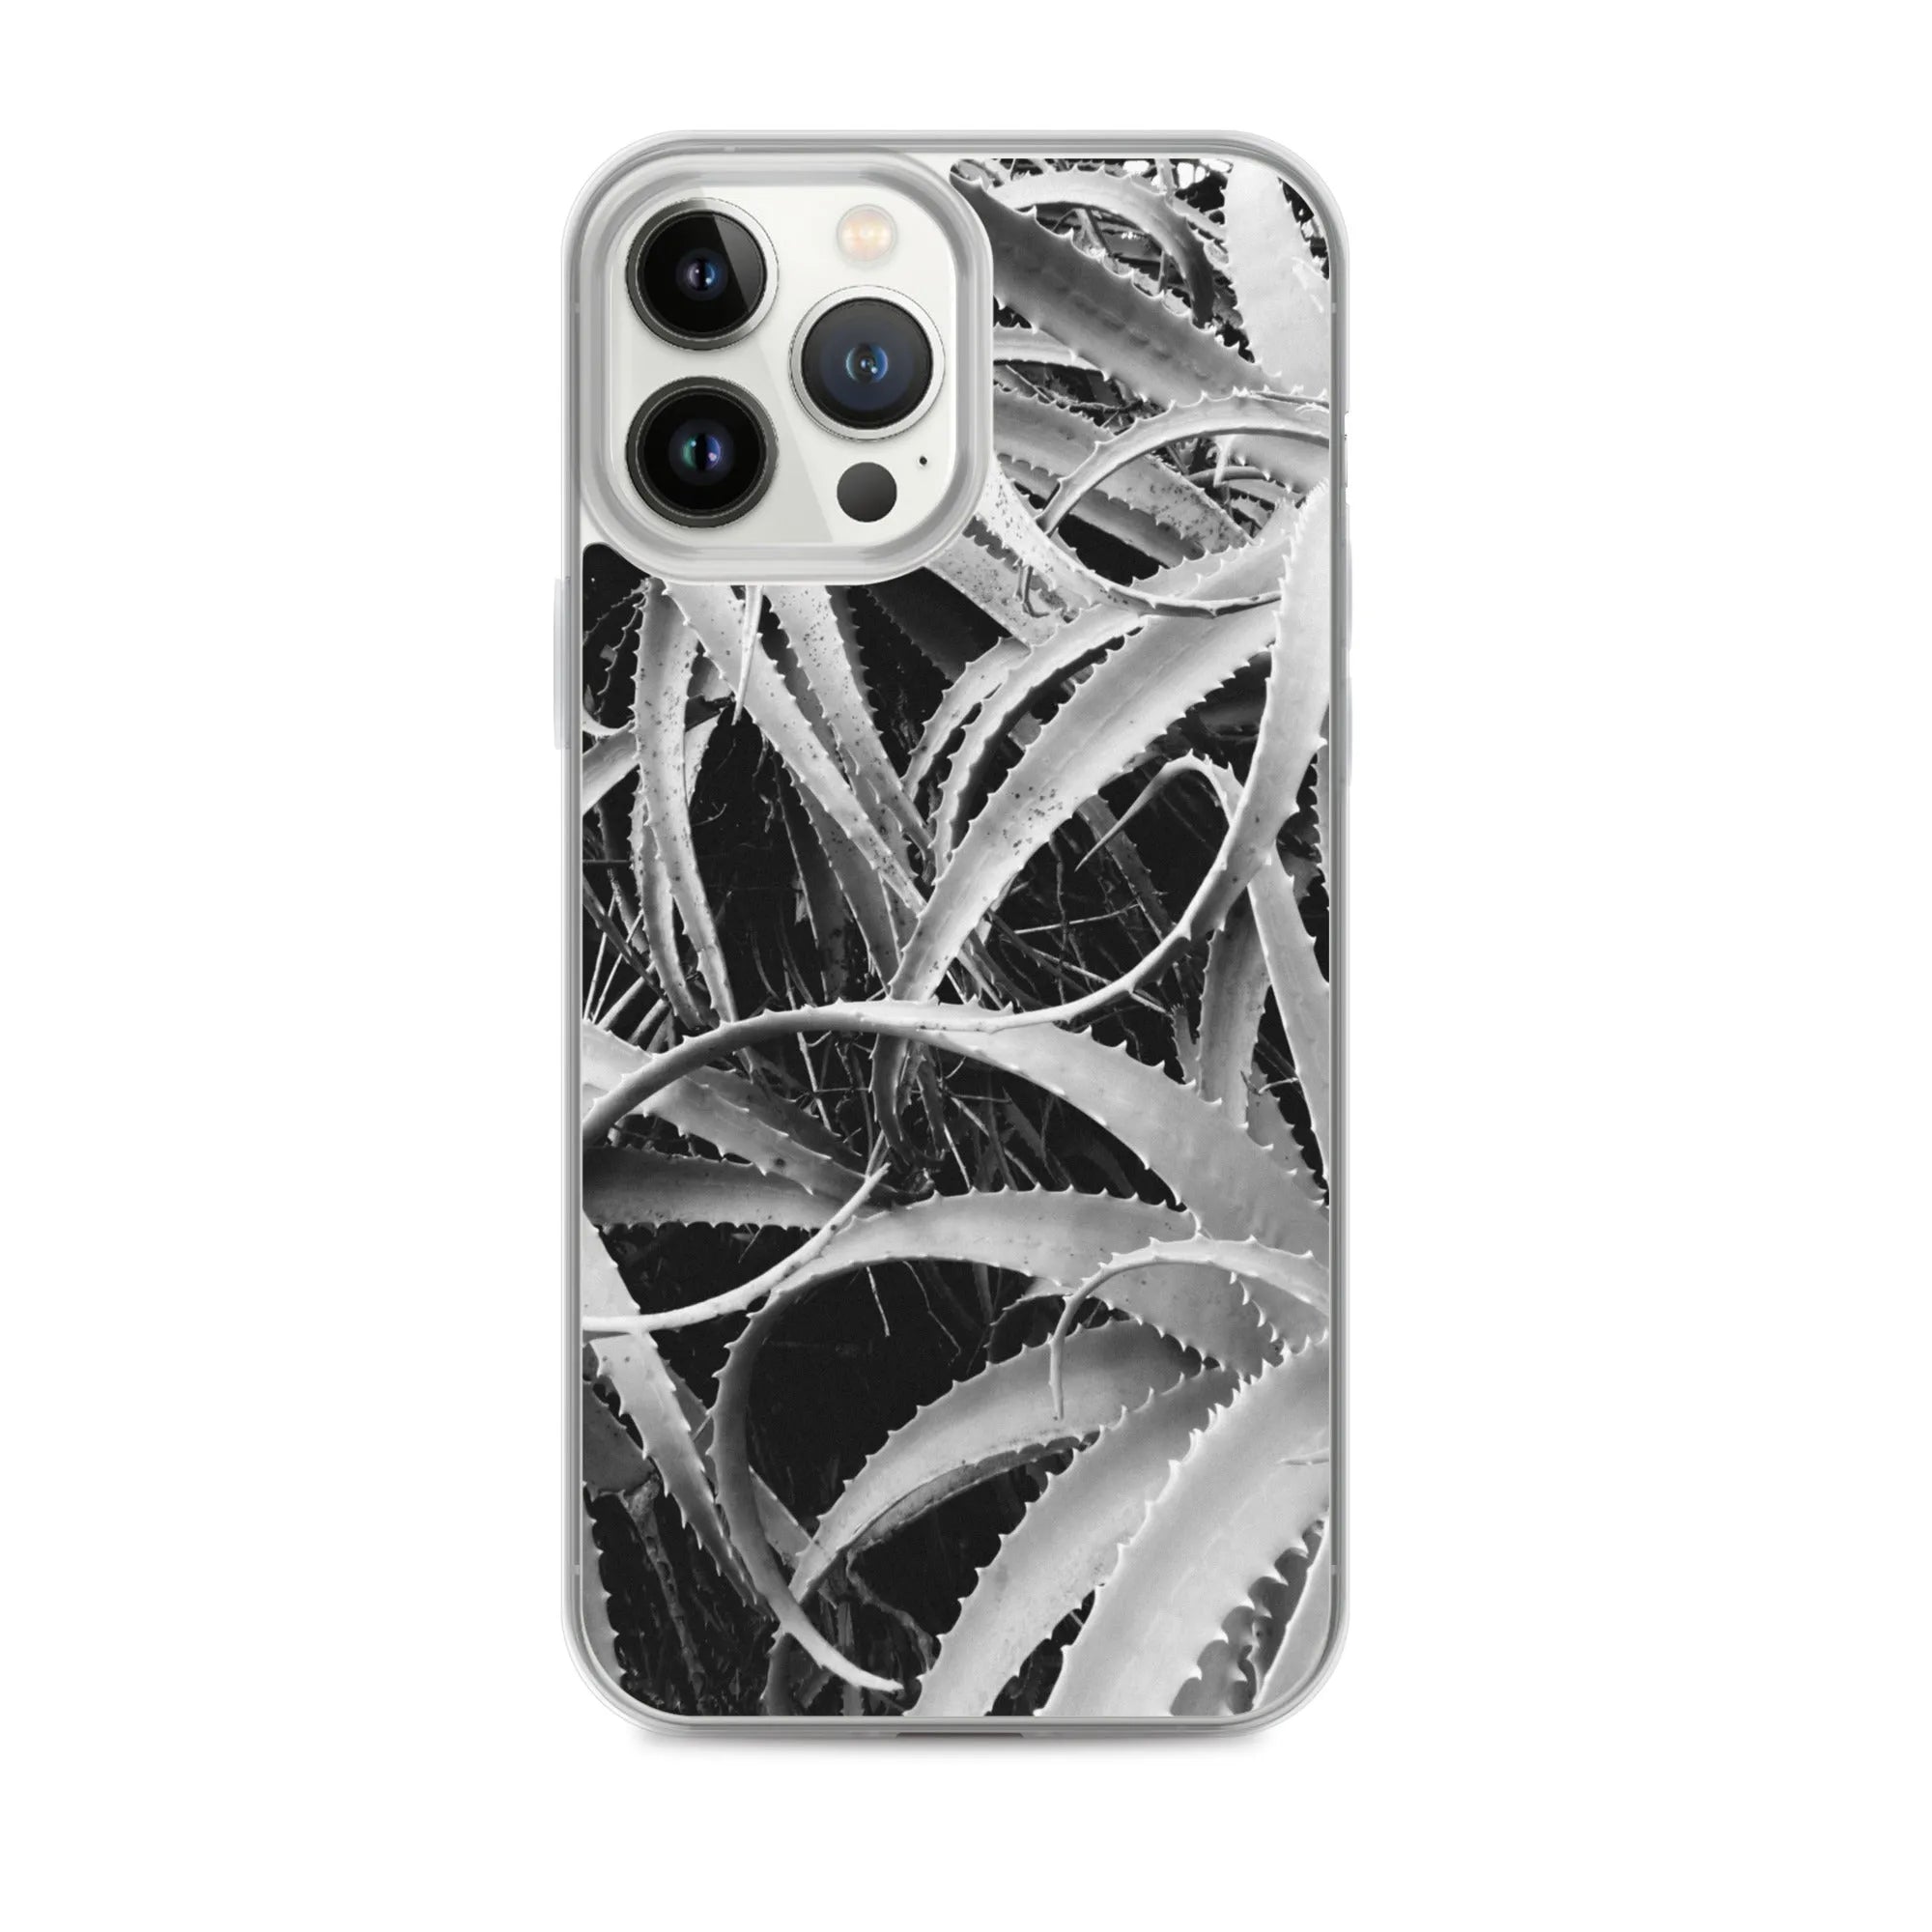 Spiked 2 + Too Botanical Art Iphone Case - Black And White - Iphone 13 Pro Max - Mobile Phone Cases - Aesthetic Art